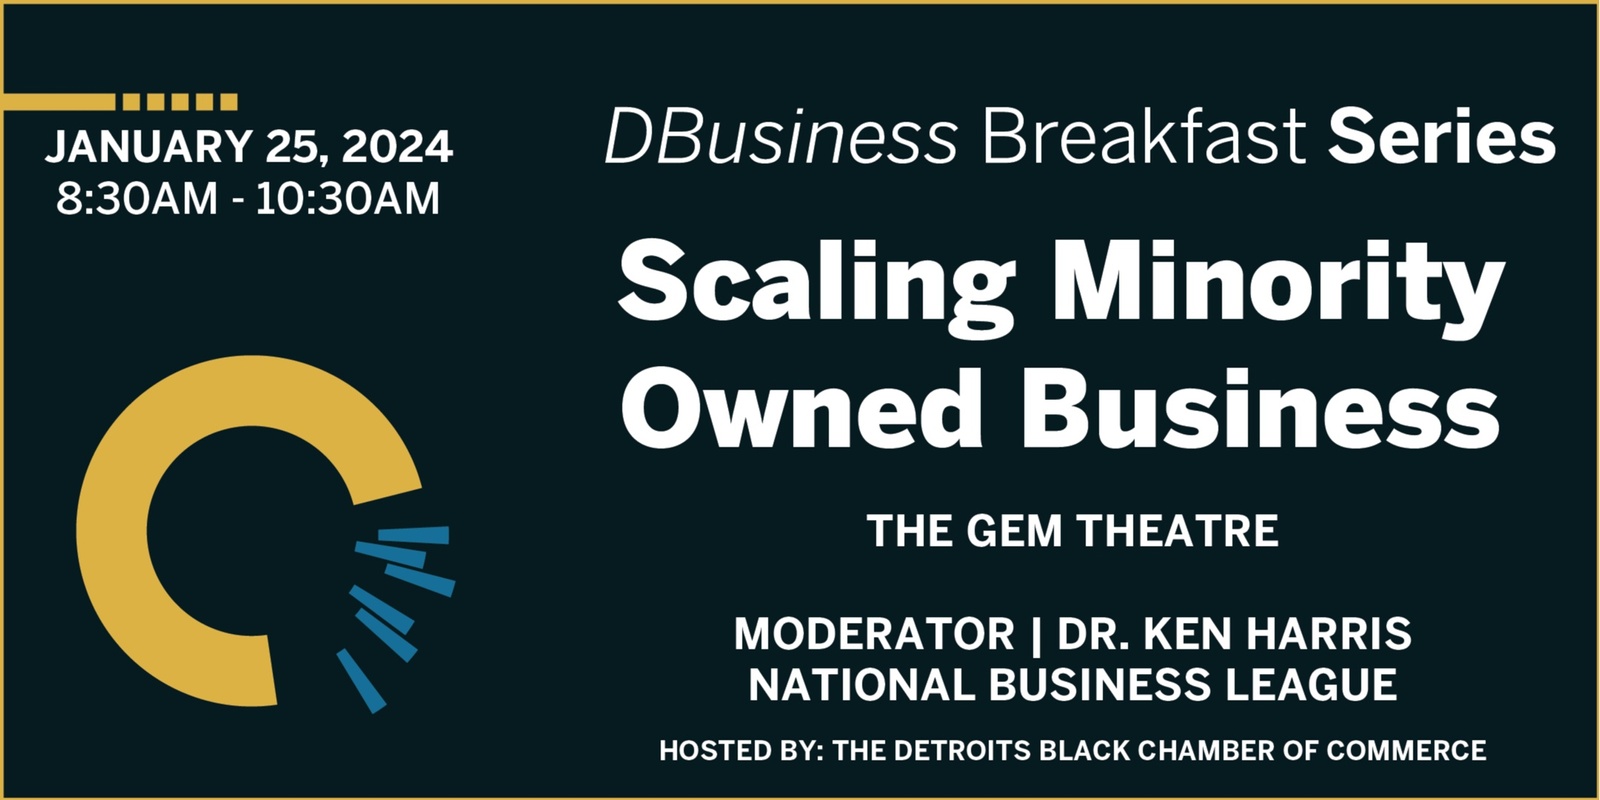 Banner image for Scaling Minority Owned Business: DBusiness Breakfast Series